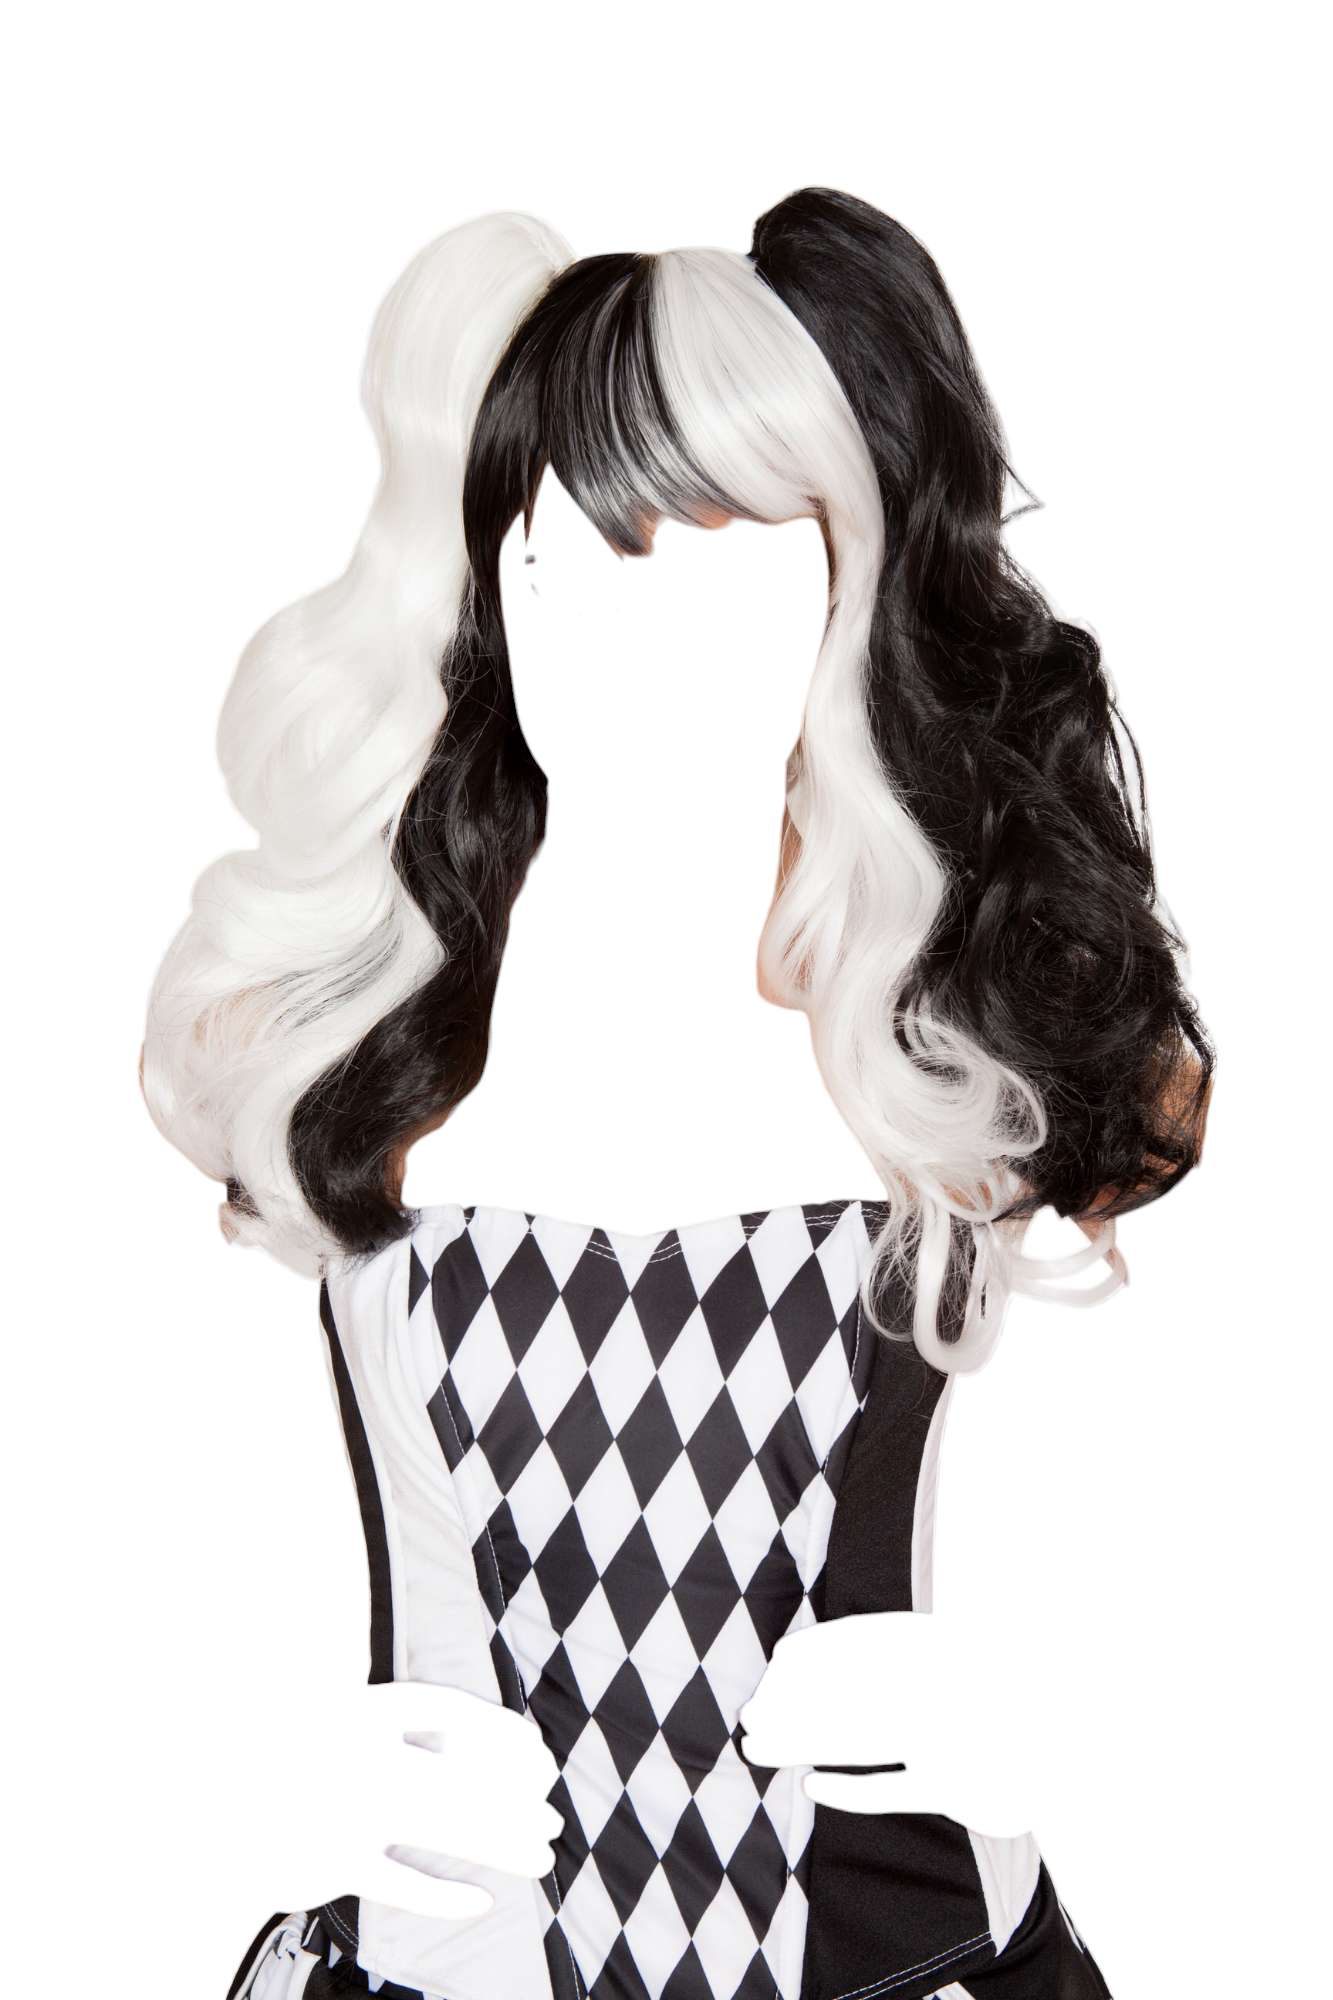 Roma Costume Wig Only Costume Accessory Black/White One Size